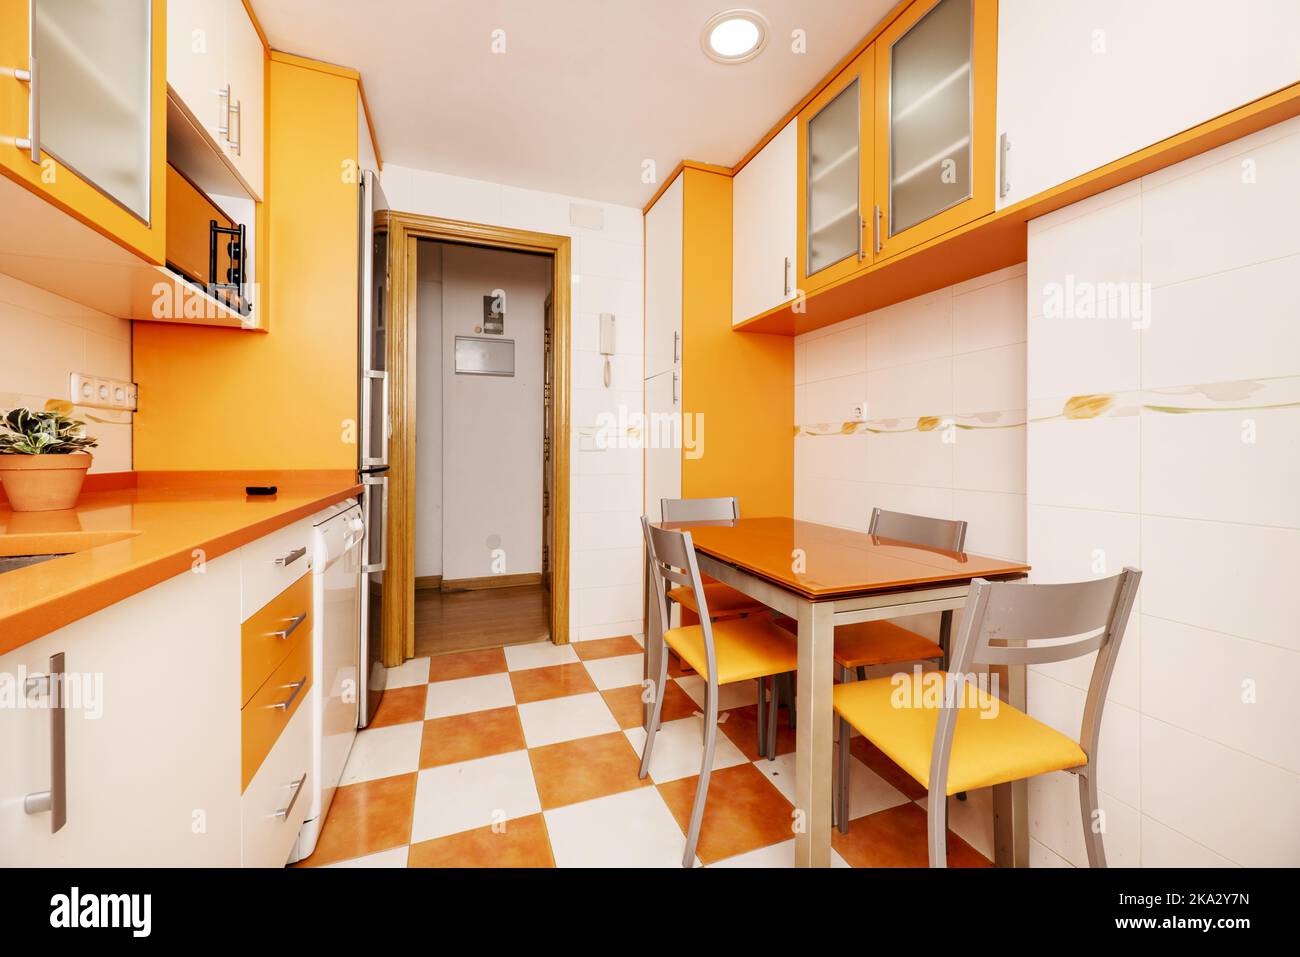 Kitchen design with bright orange and white cabinets with matching dining table and gray metal chairs Stock Photo